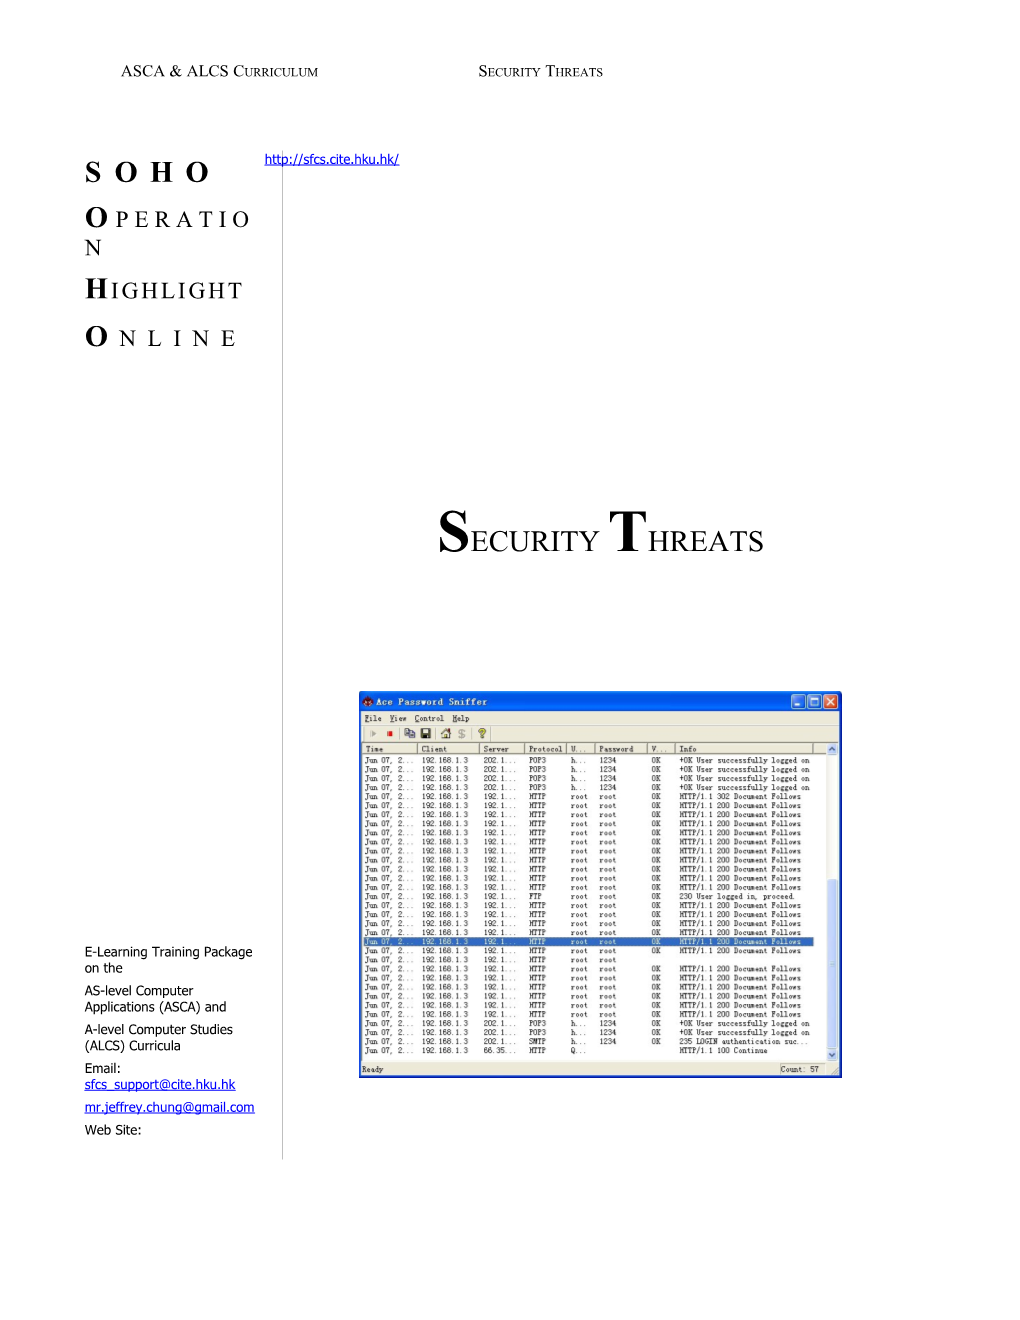 MS-Word Template for RUTCOR Research Reports V1.0